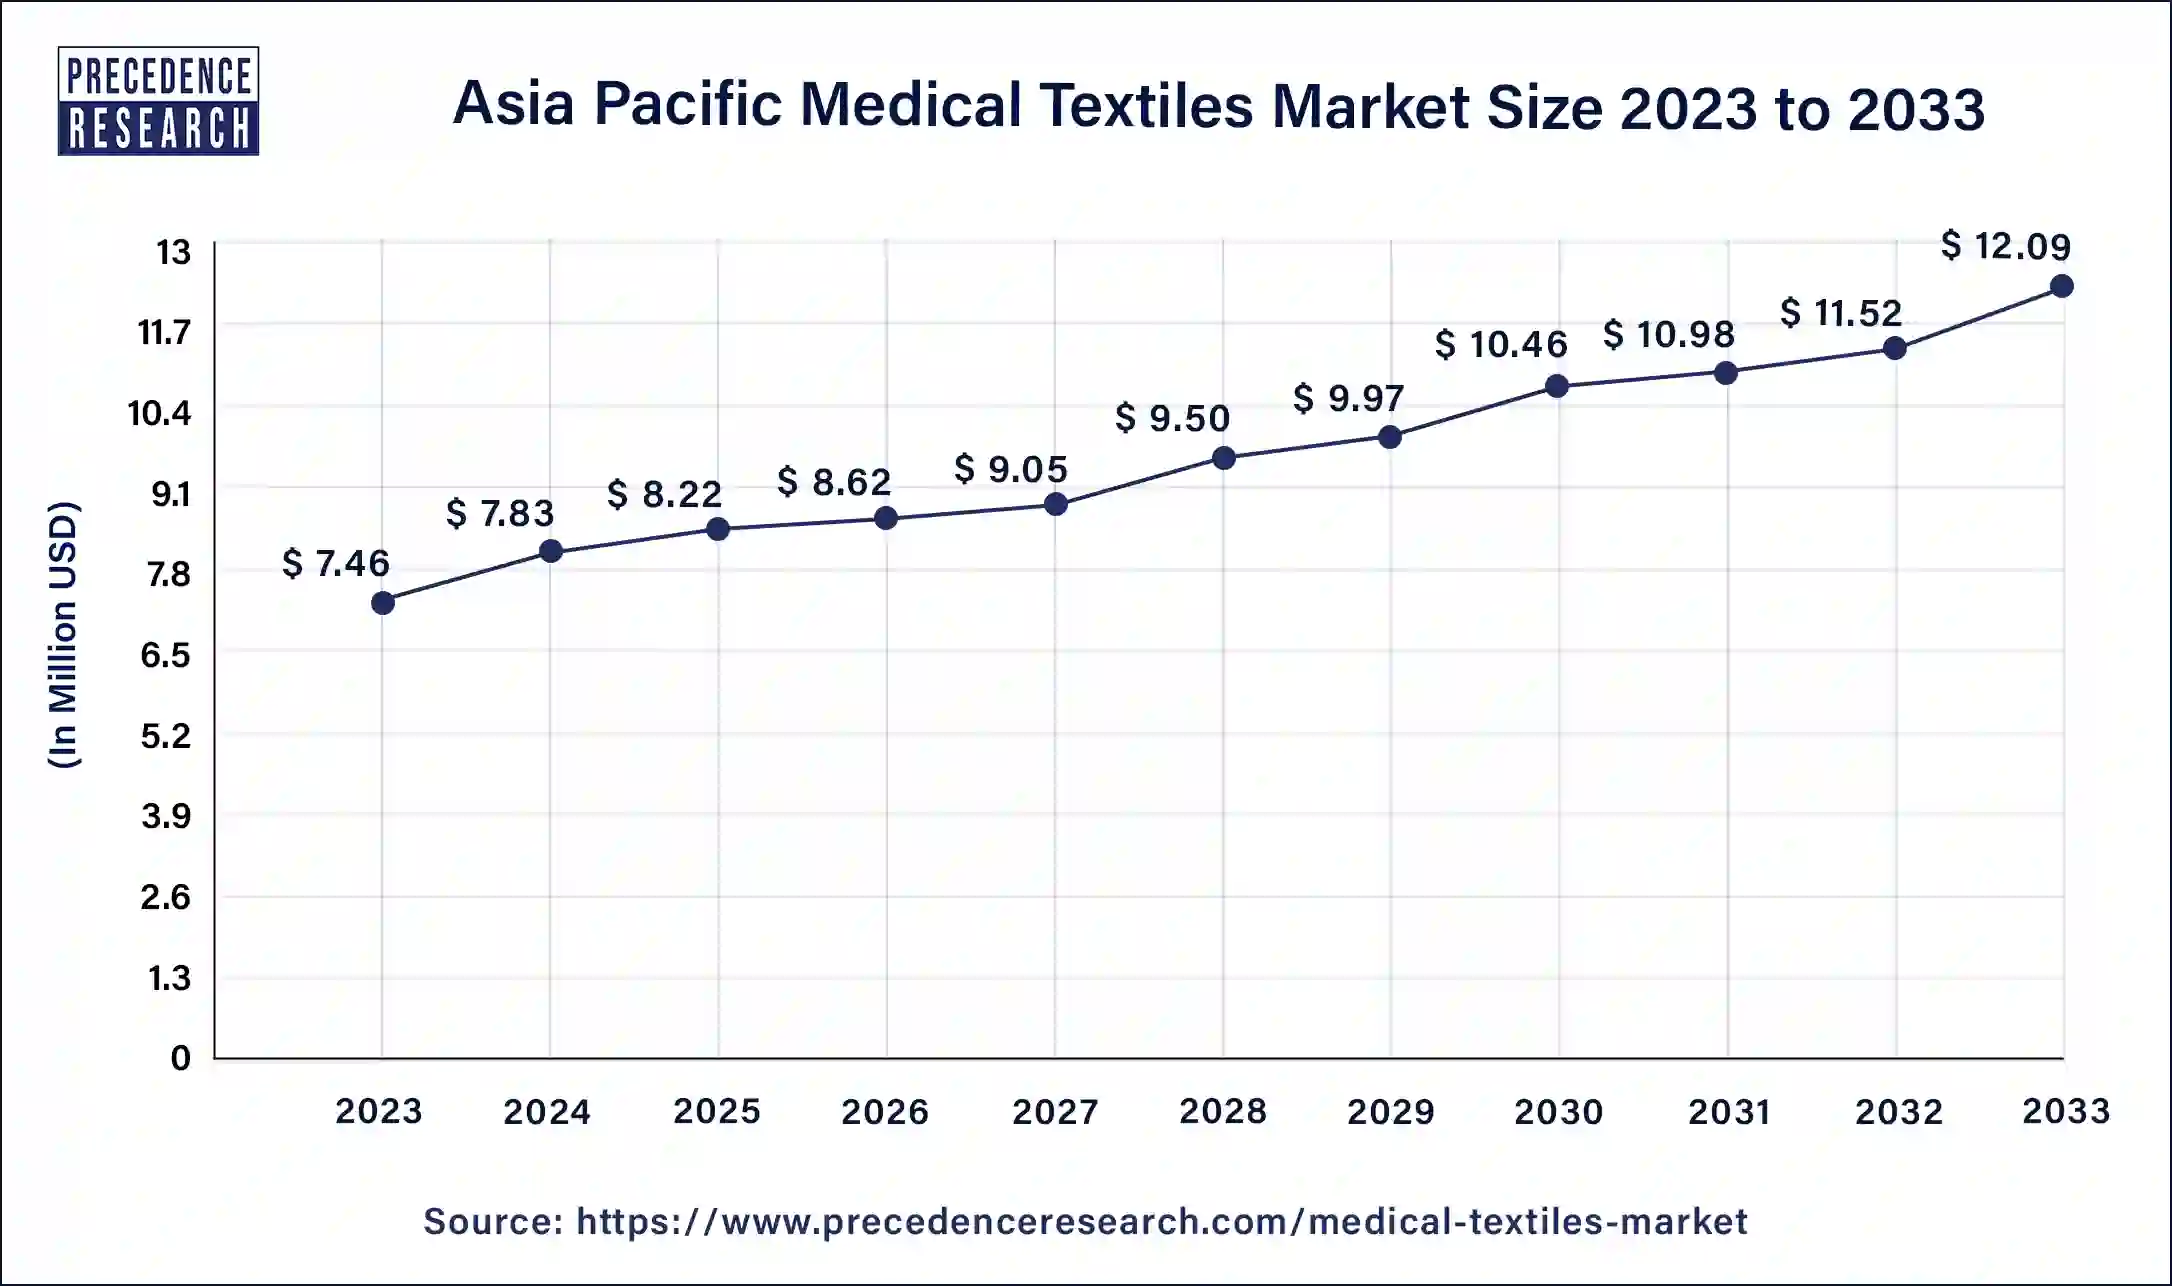 Asia Pacific Medical Textiles Market Size 2024 to 2033